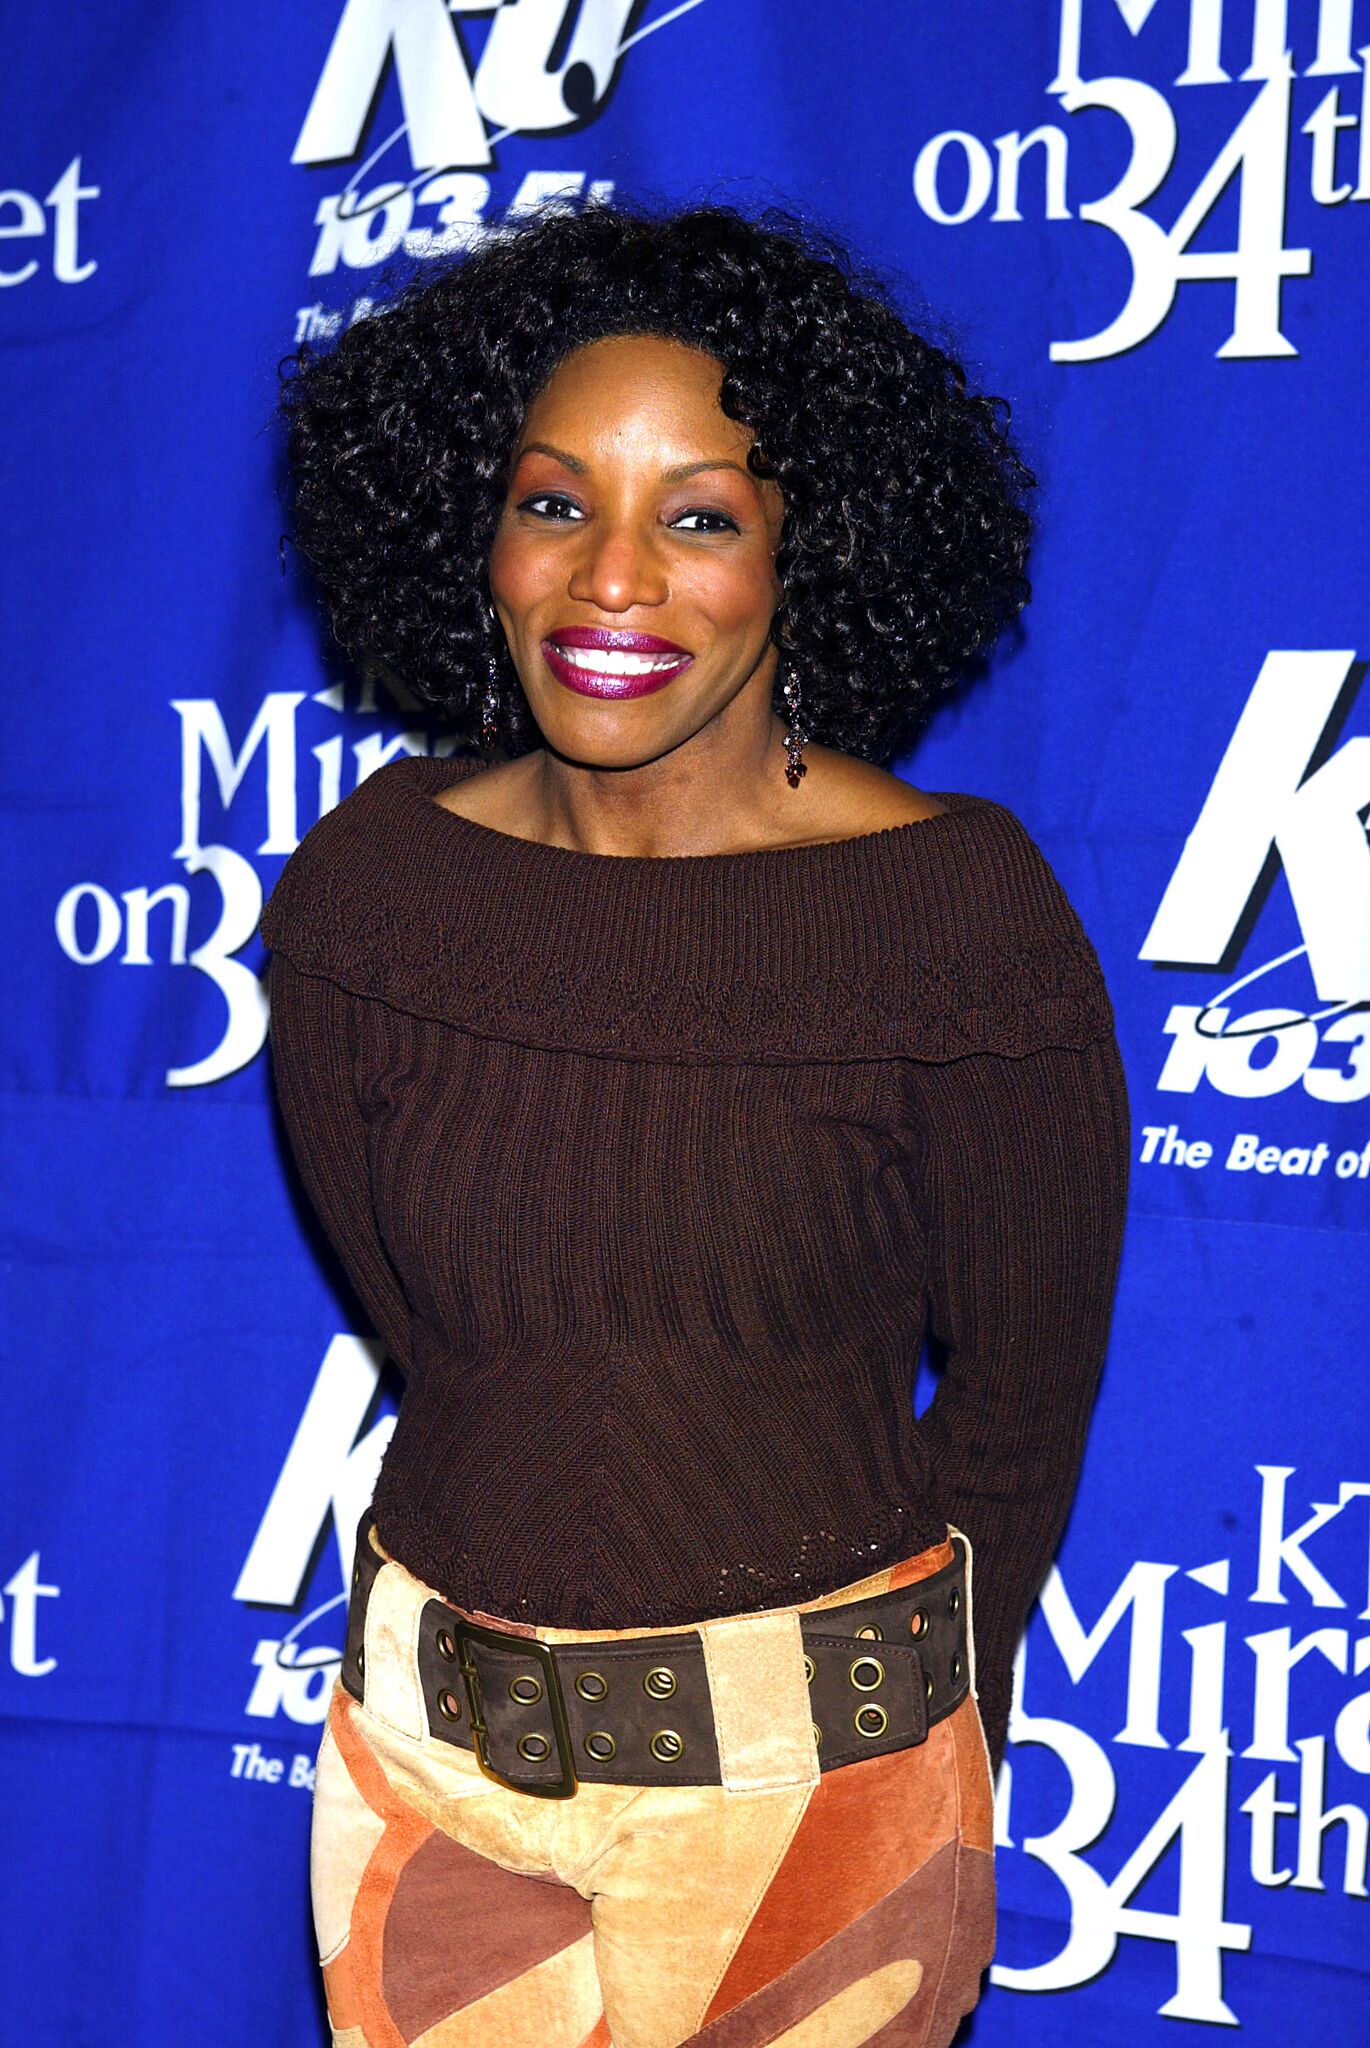 Stephanie Mills backstage during "KTU's Miracle on 34th Street" hoilday concert at Madison Square Garden in New York City | Getty Images